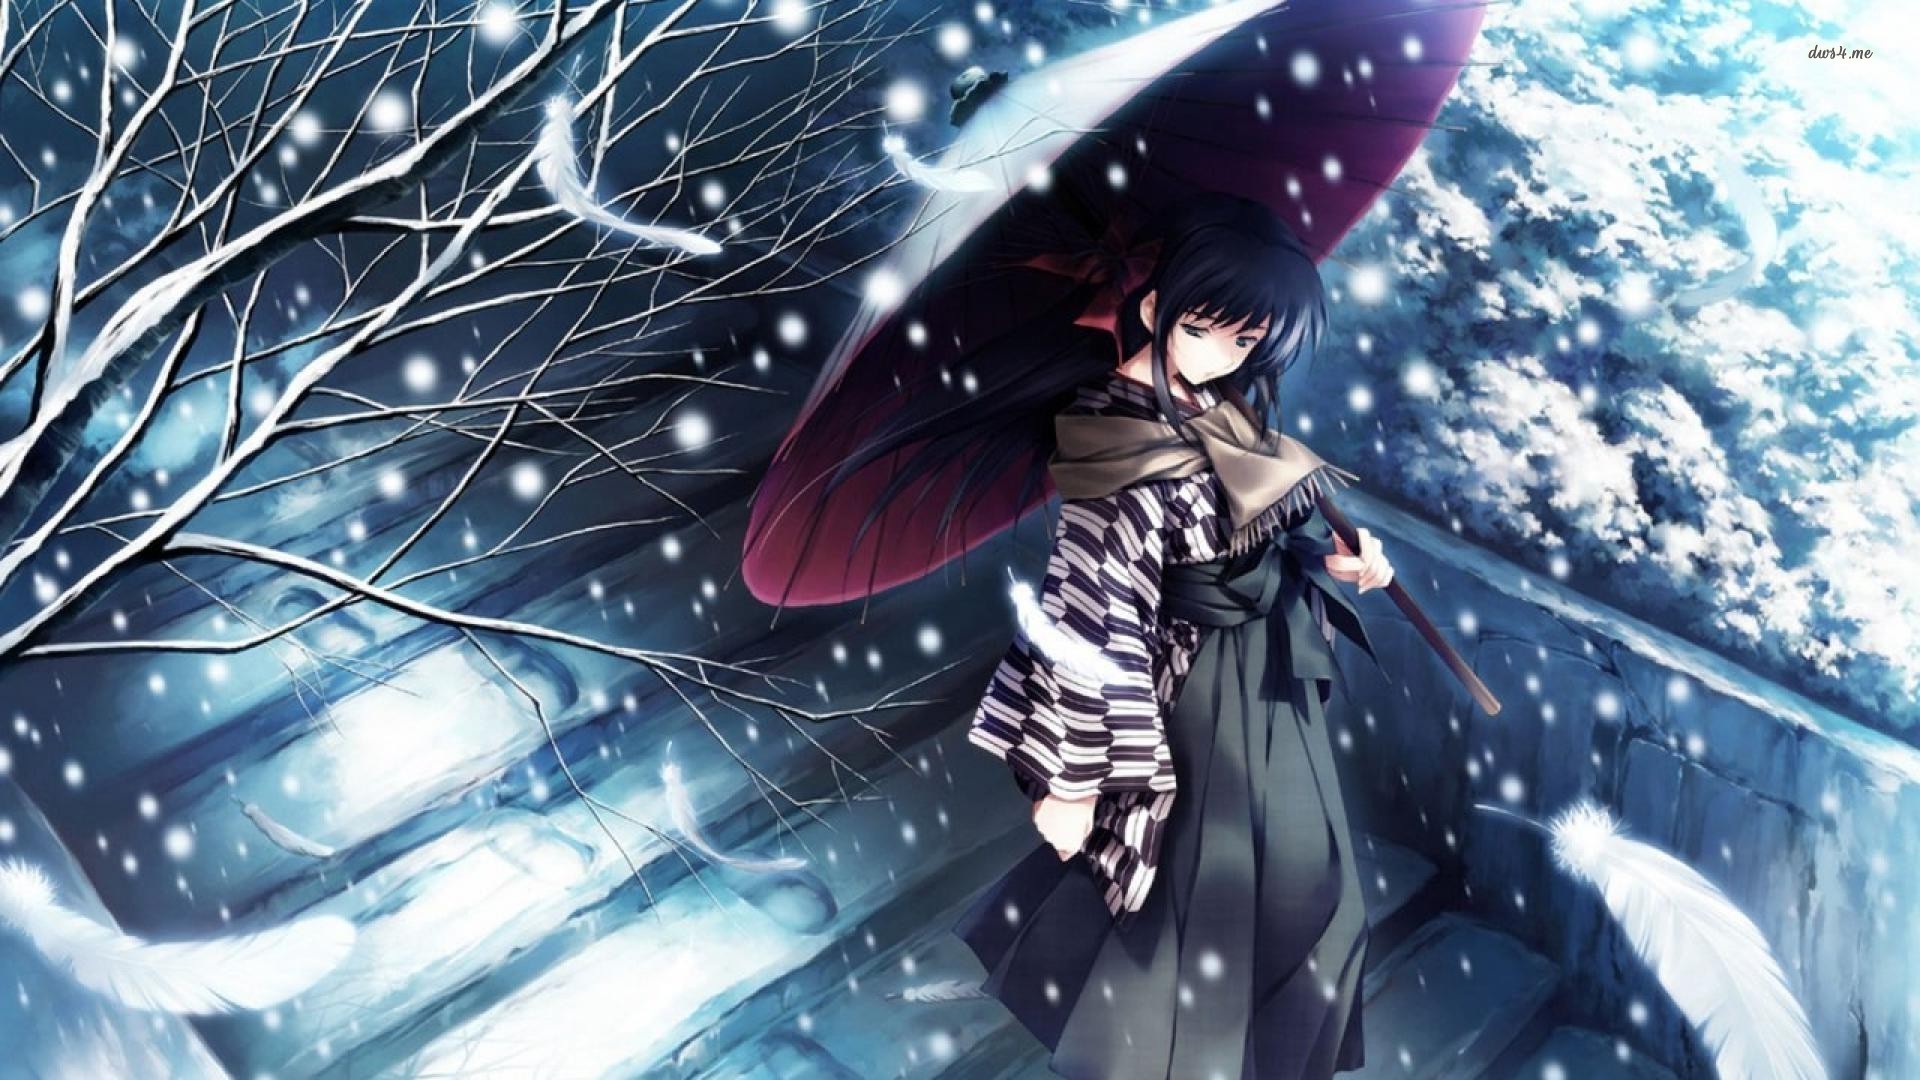 1920x1080 wallpaper.wiki-Girl-in-The-Snow-With-An-